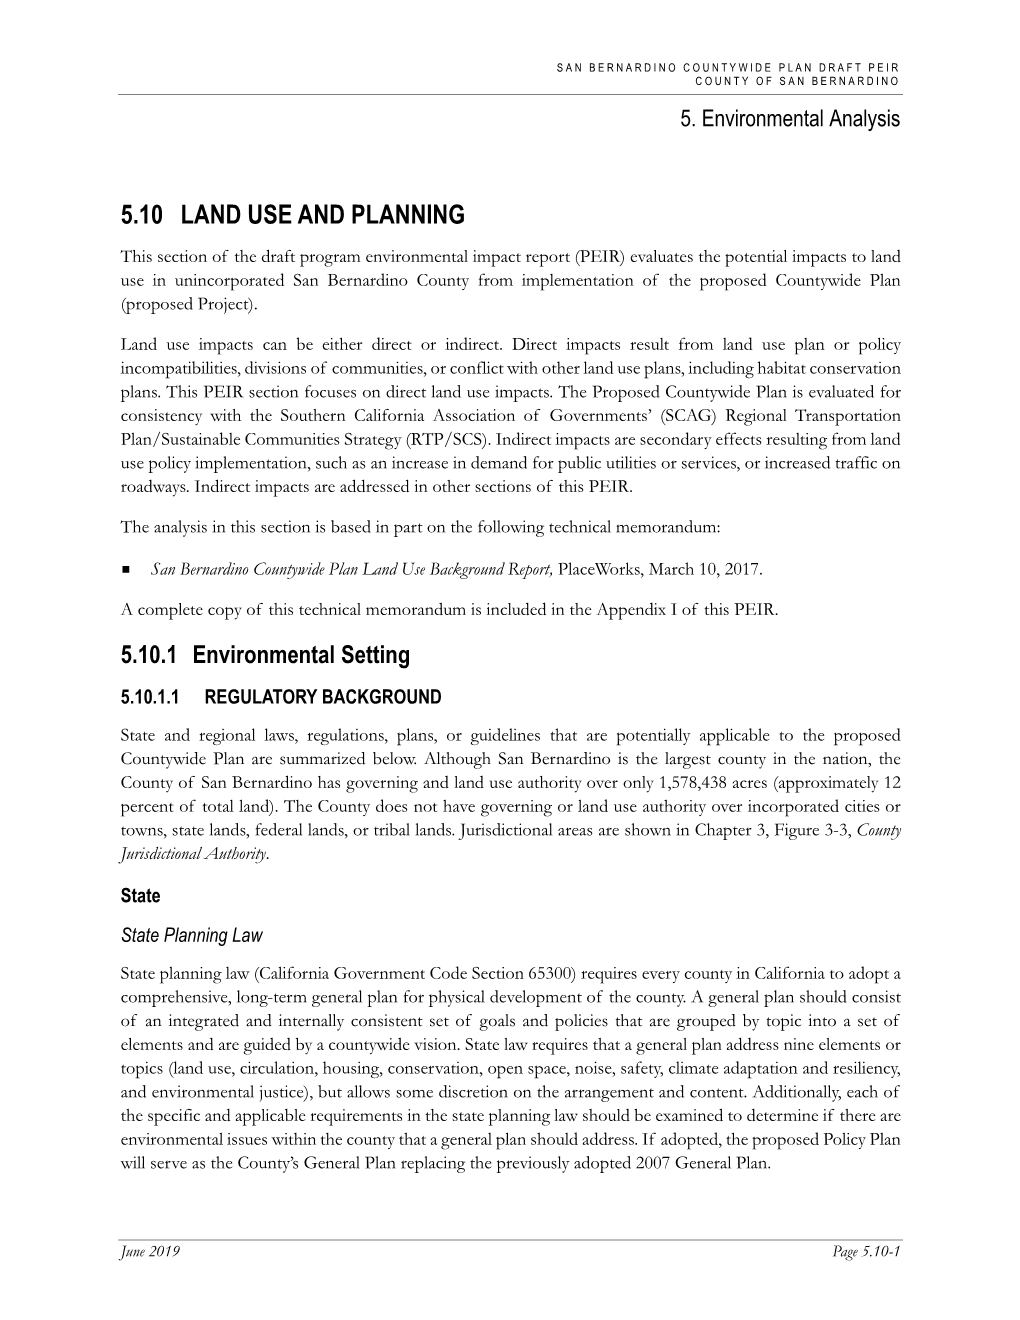 5.10 Land Use and Planning